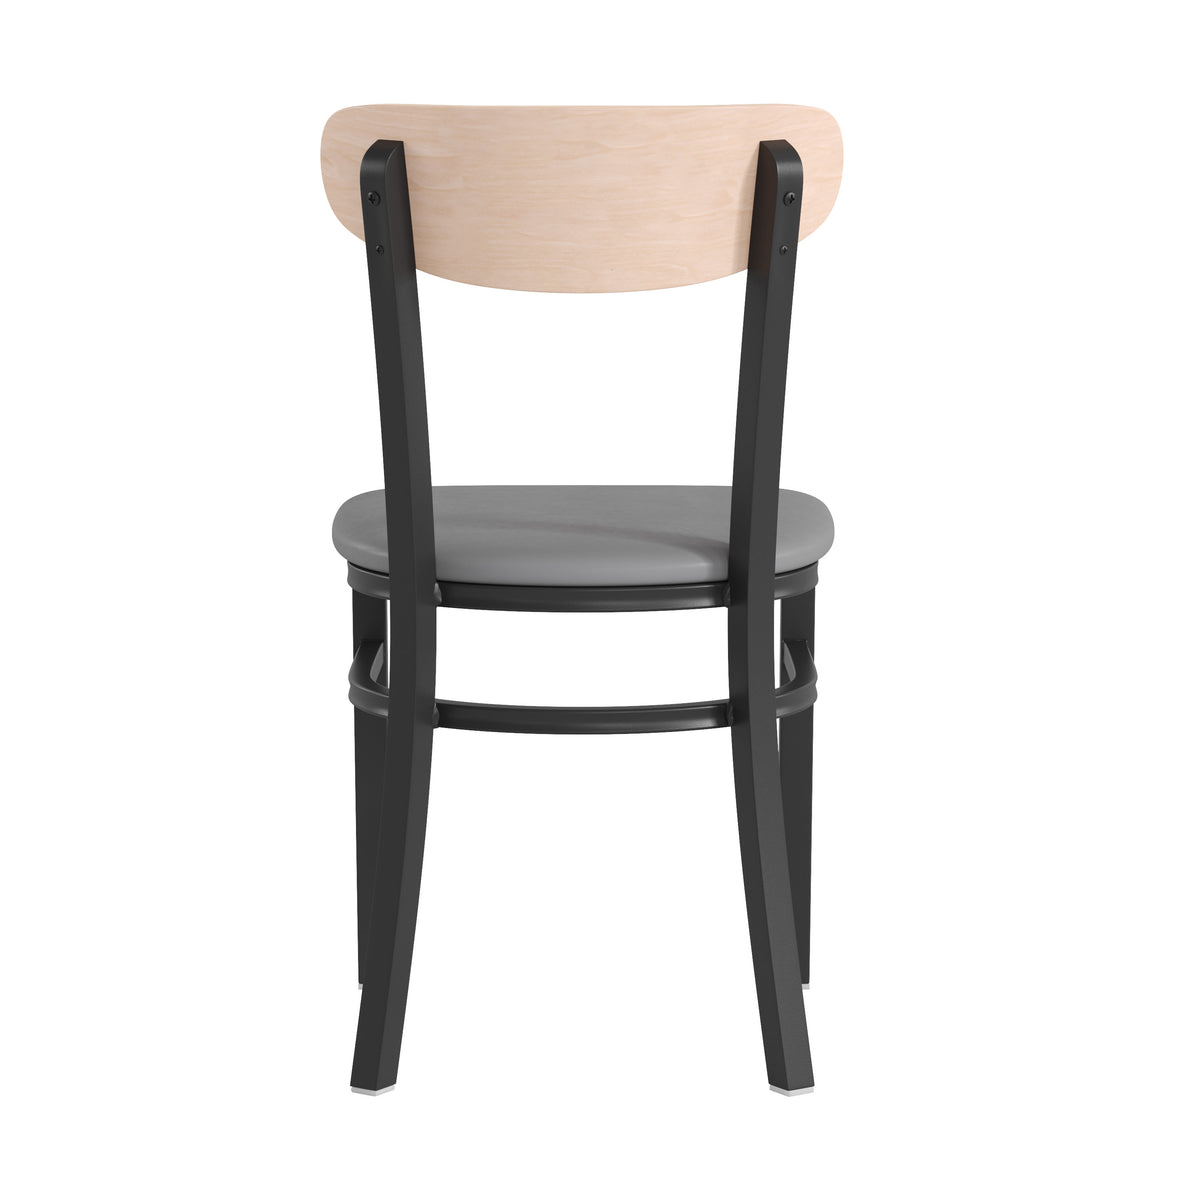 Natural Birch Wood Back/Gray Vinyl Seat |#| Commercial Metal Dining Chair - Vinyl Seat and Wood Boomerang Back-Gray/Natural